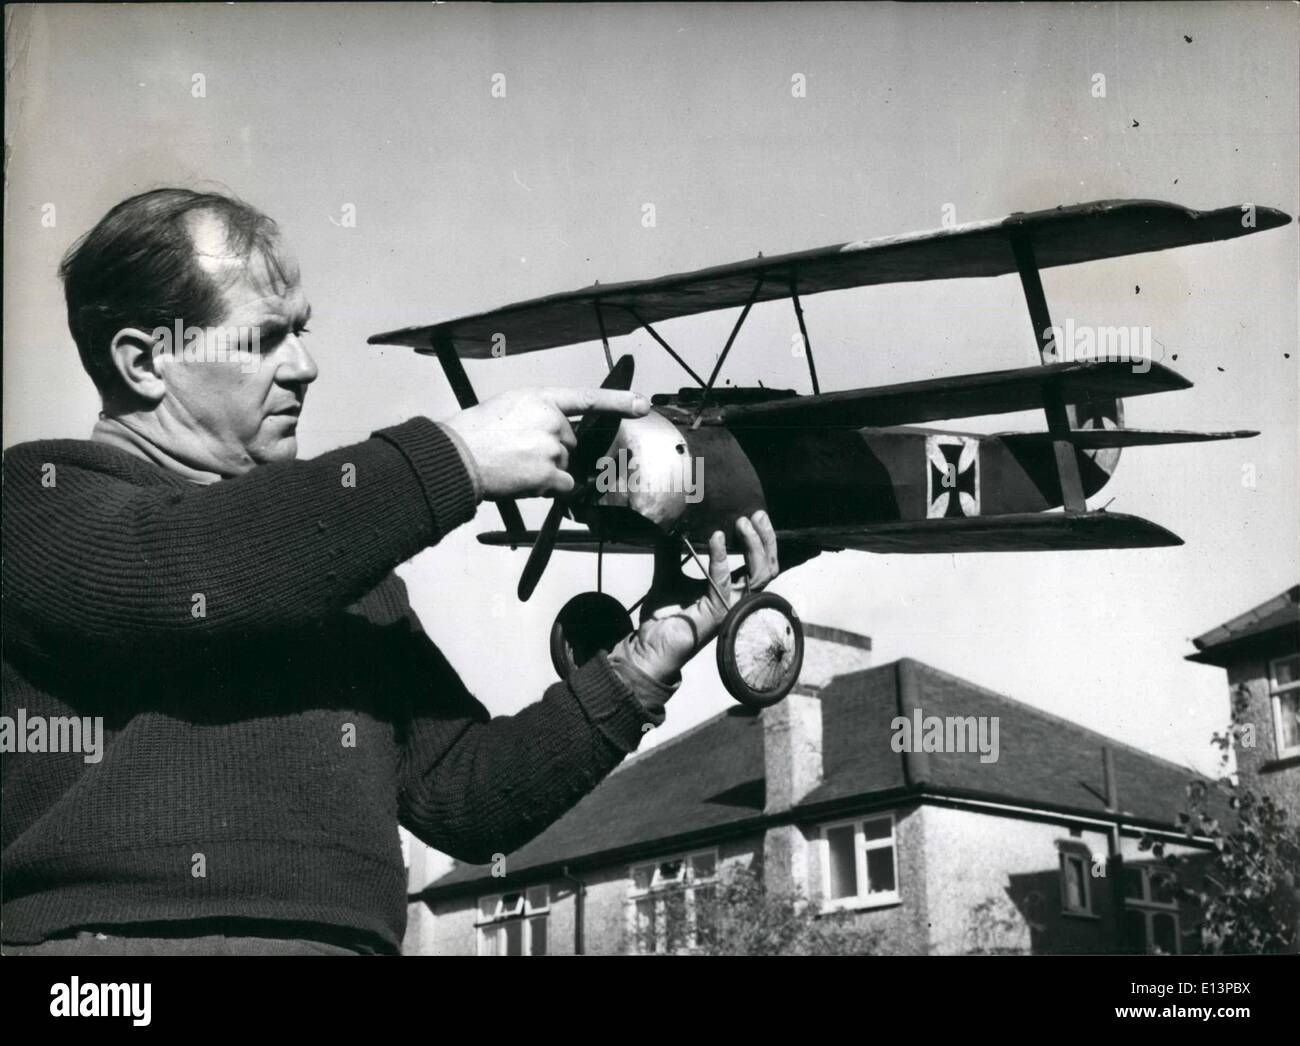 Mar. 22, 2012 - A Hand Made Fokker Tri Plane of First World War Vintage. Mr. Edward Norman holds one of his earliest models a Fokker fighter with three wings. It actually fliesÃ Stock Photo